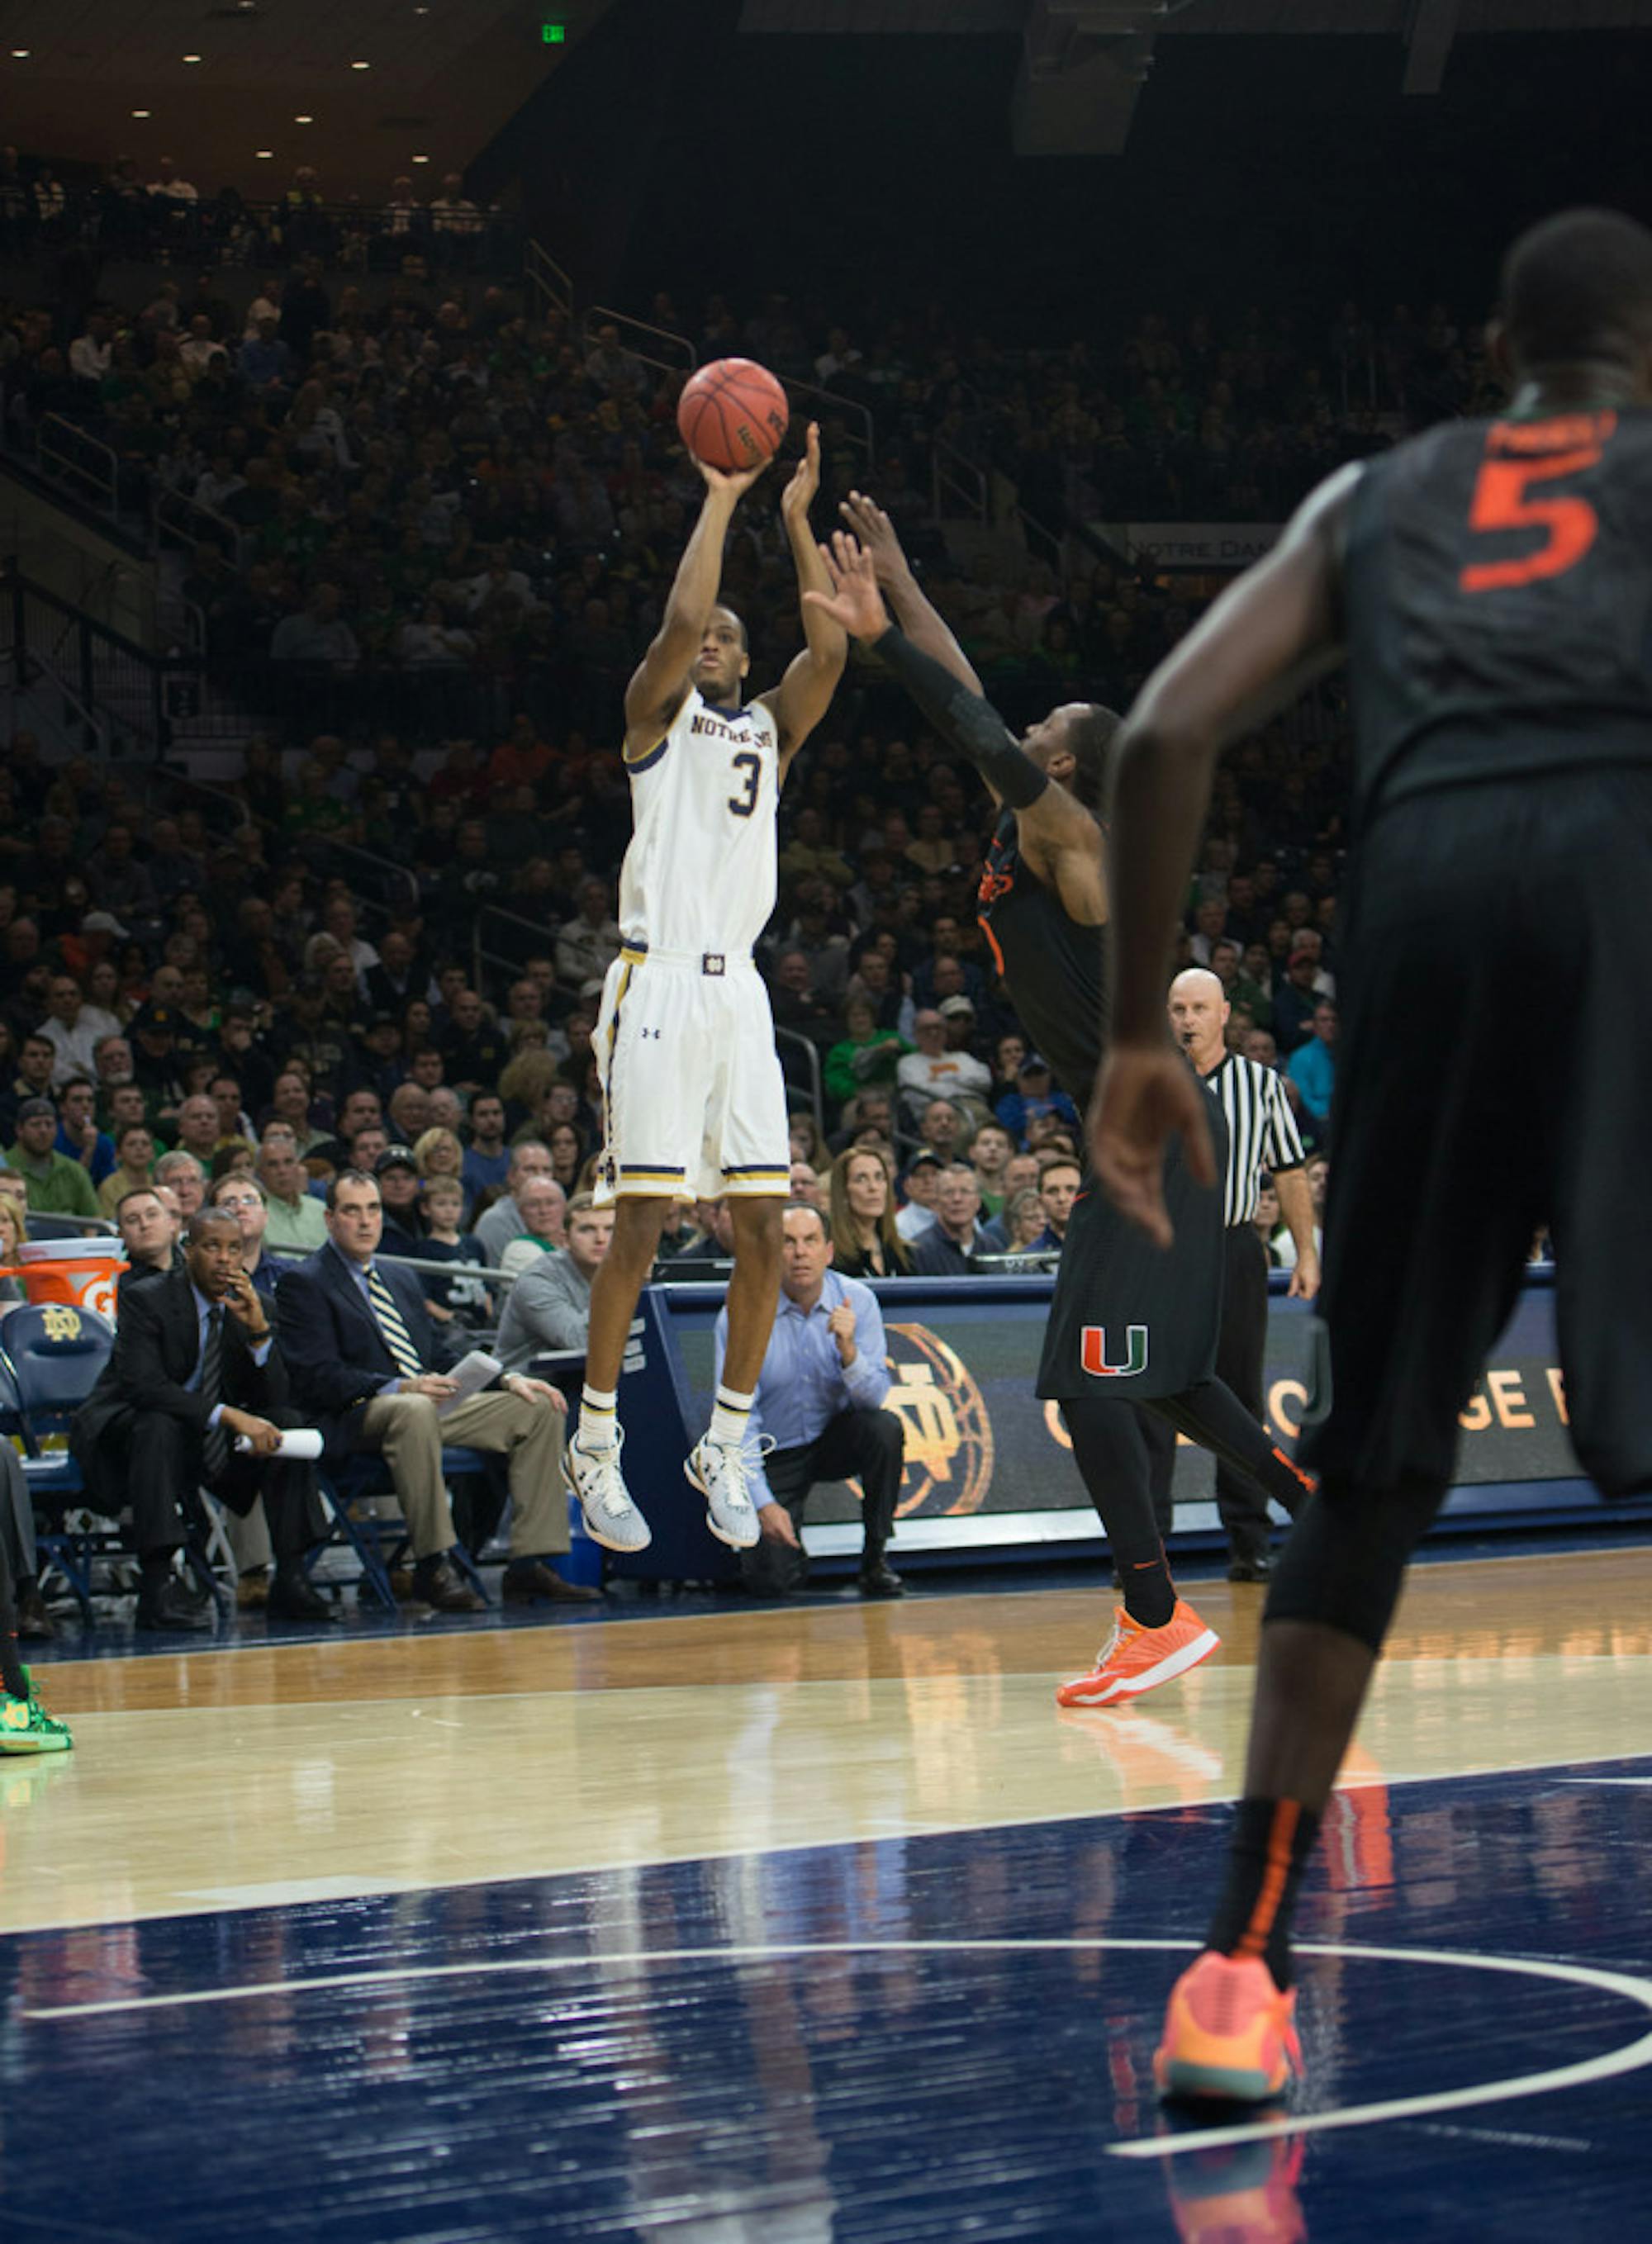 Irish sophomore forward V.J. Beachem shoots a three-pointer during Notre Dame’s 75-70 win over Miami on Saturday at Purcell Pavilion.